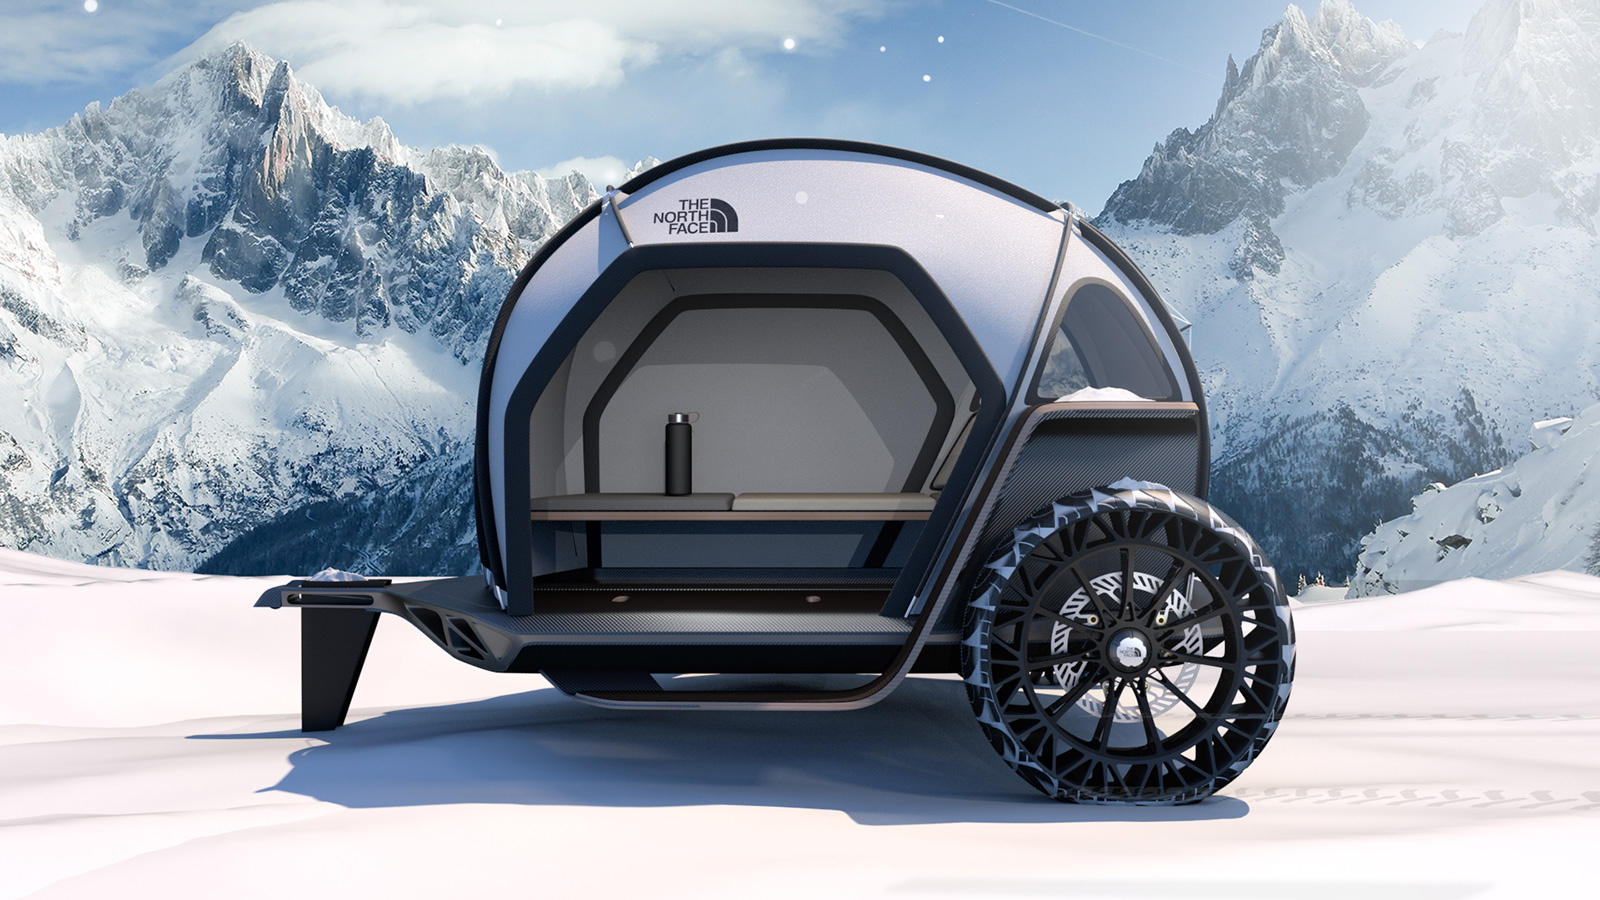 BMW teams up with The North Face on a futuristic element-proof camper